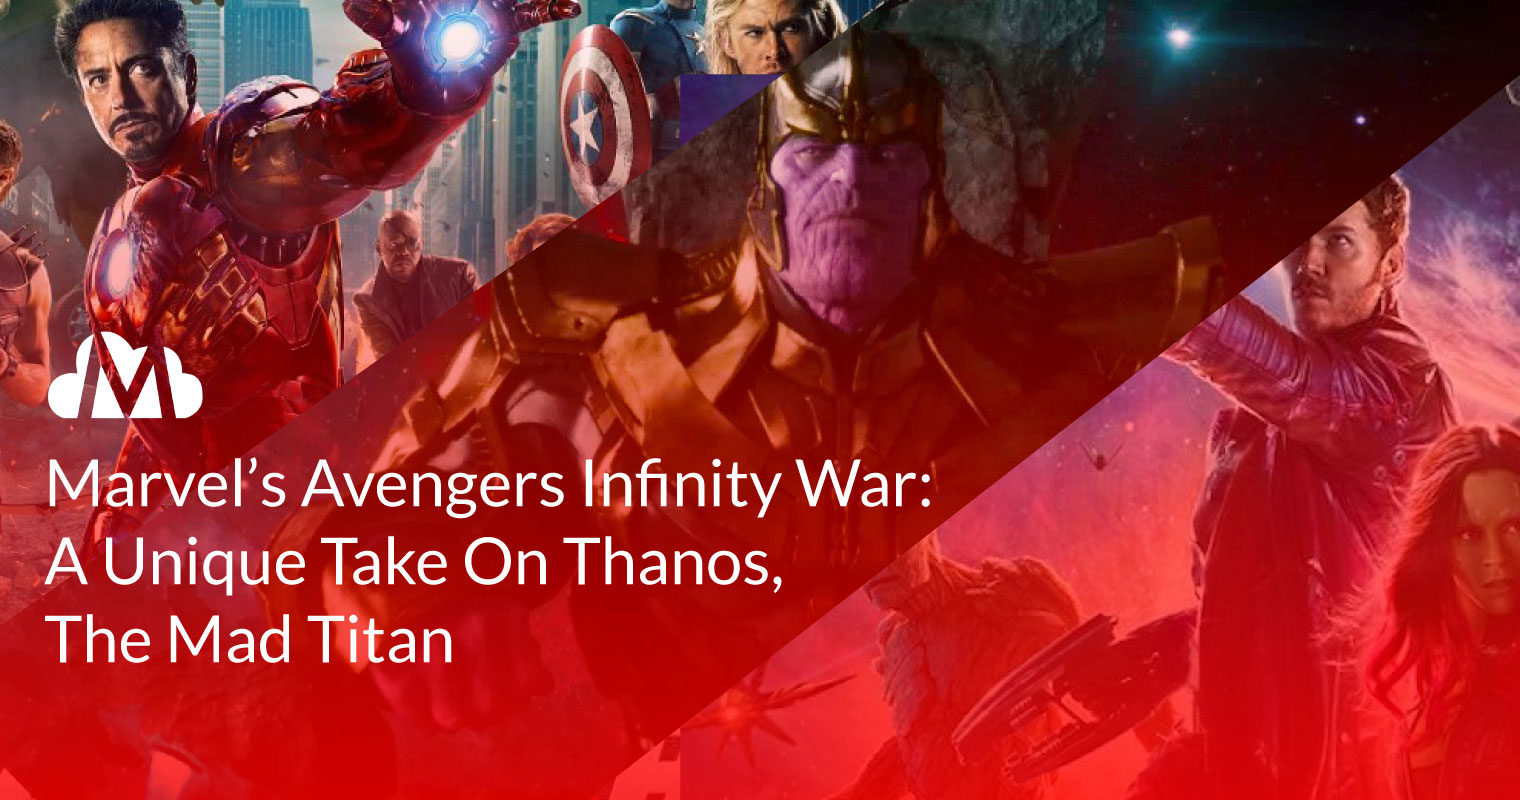 Marvel’s Avengers Infinity War: A Unique Take On Thanos, The Mad Titan